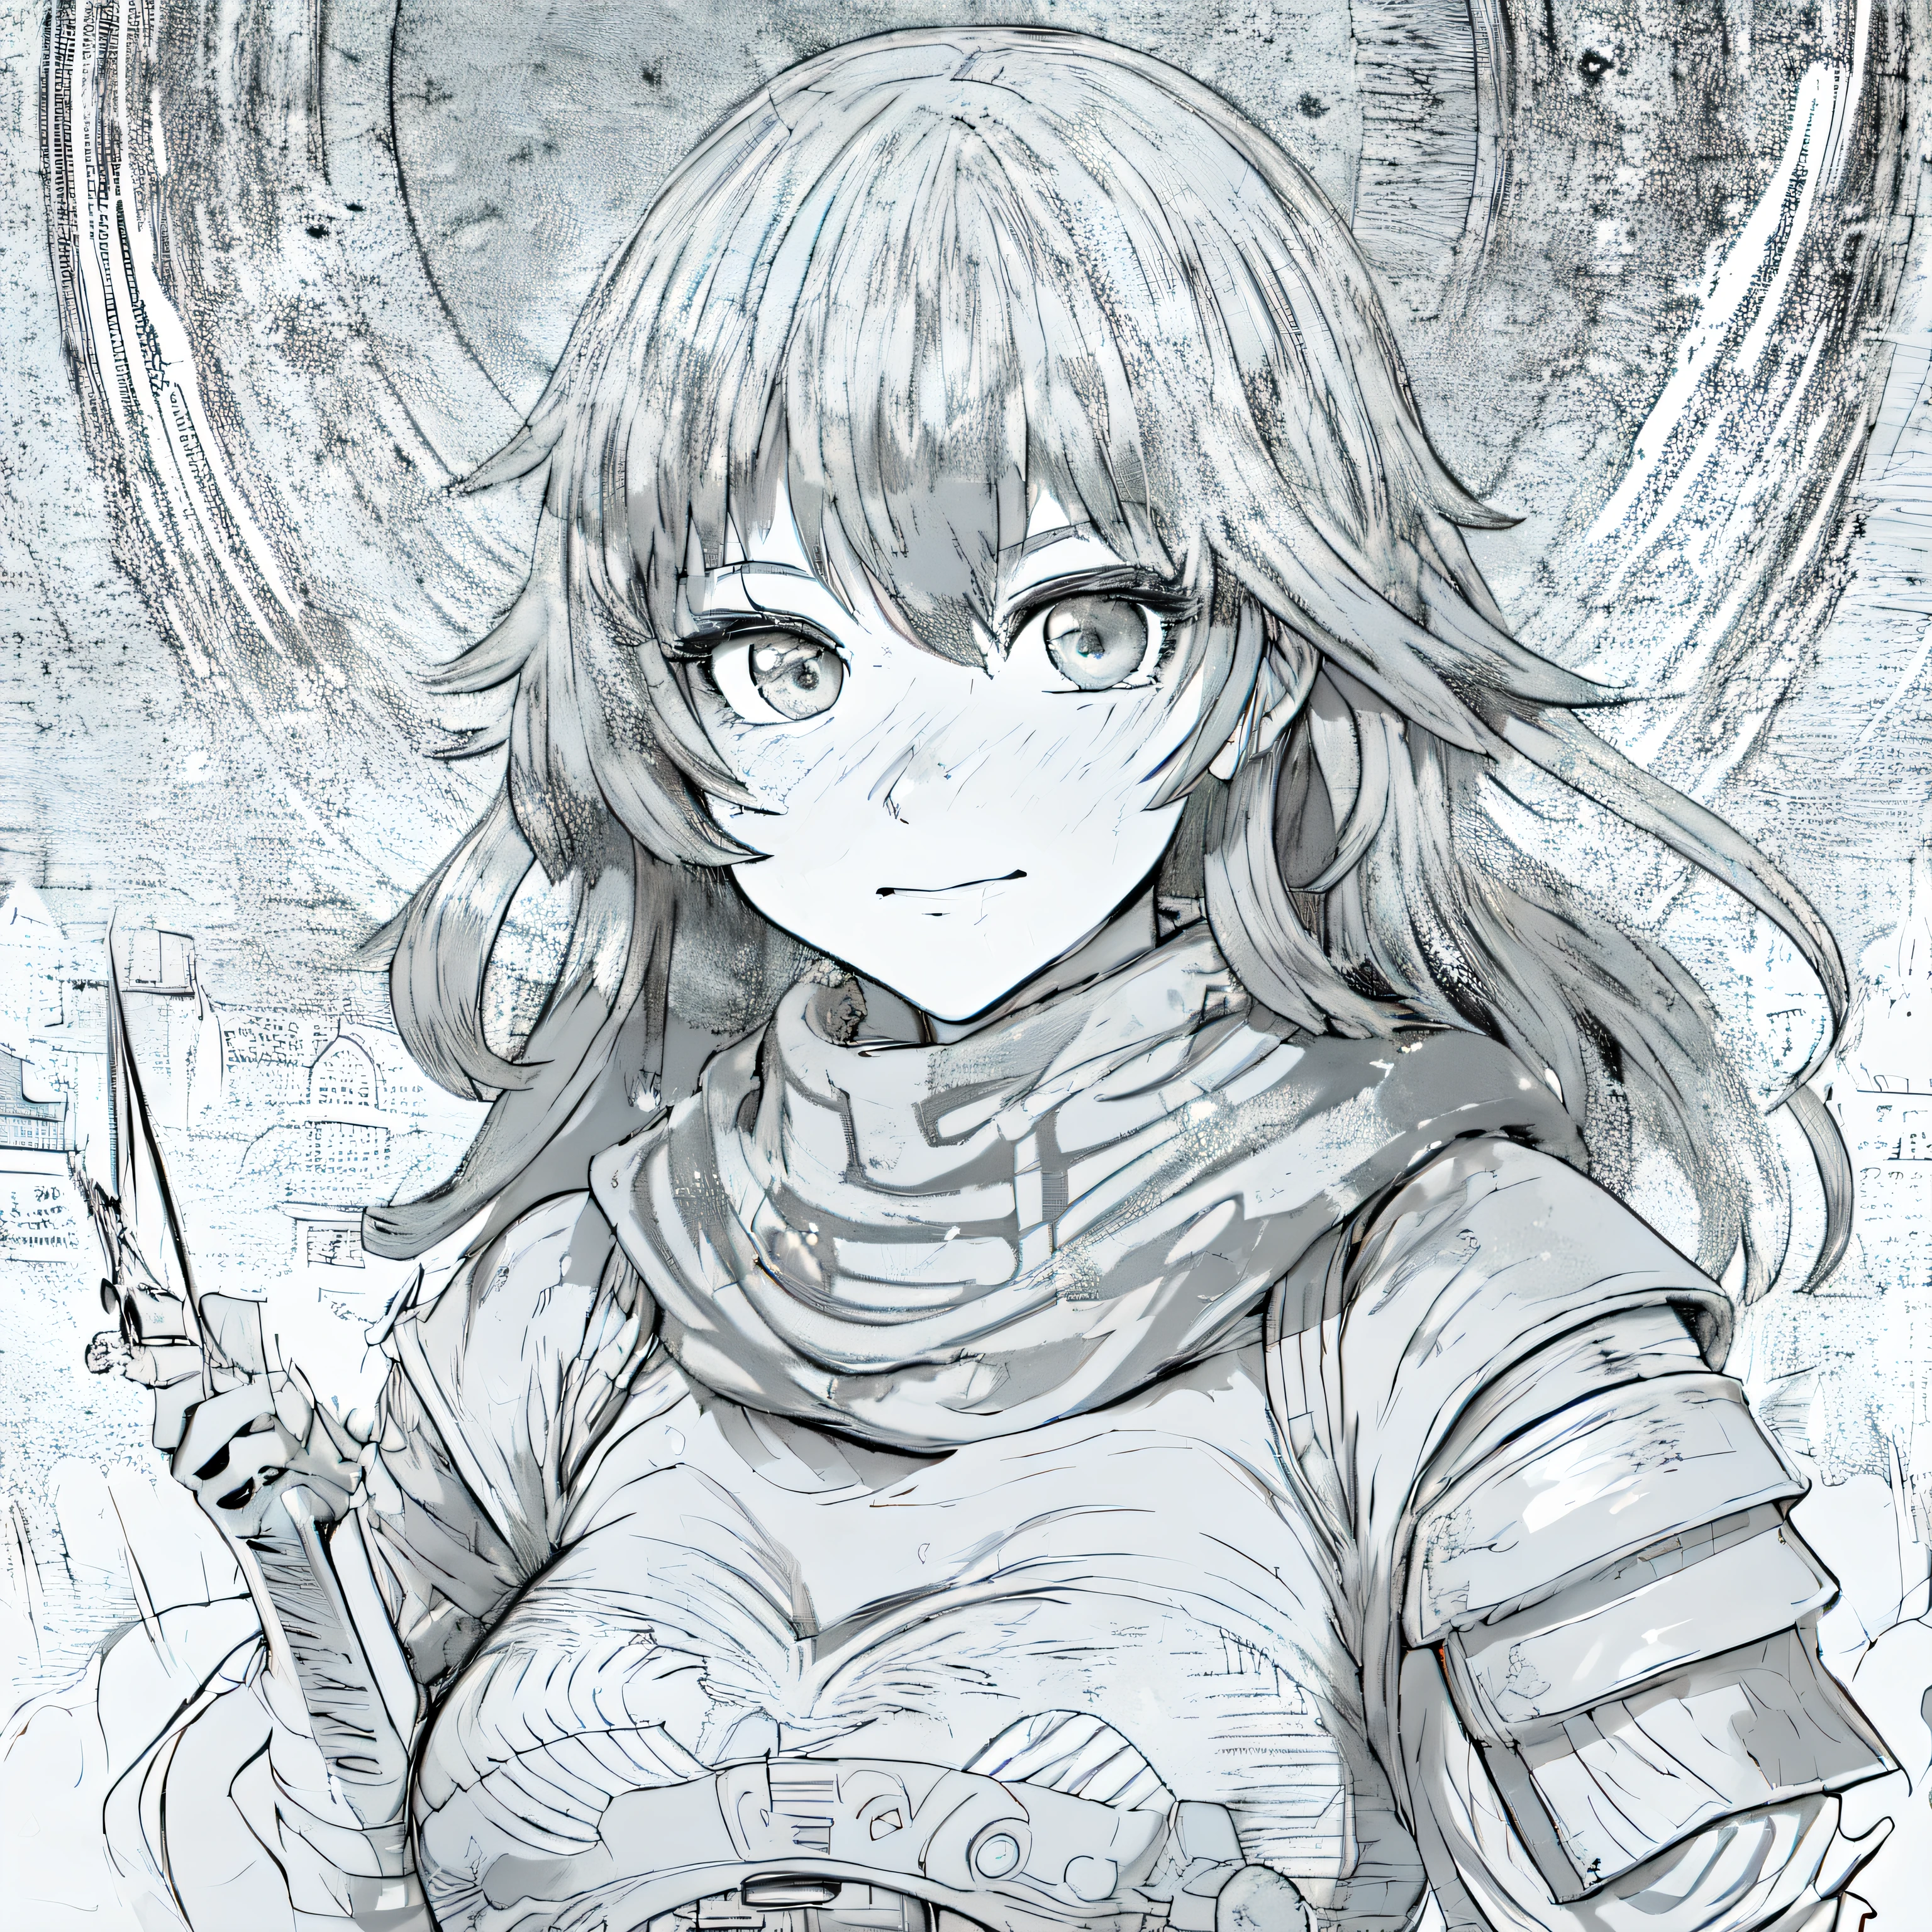 1girl, the 22, lineart, manga style, hood, manga lineart, monochrome, Whole body, Inspired by Ryuko Matoi, Freckles in the face, anime style, warrior girl, medieval character concept, rpg style, blond hair, Long hair, locks of hair, long circular earrings, Big eyebrows, thick eyebrows, armadura mediaval, Half armor, metal armor, Rhombus Logo Scarf, tall girl, long legs, leather and metal boots, metal shoulder pads, small breasts, rustic metal armor, Angry, bothers, blond hair y largo, in a medieval castle, medieval kingdom, standing, In front, sonriendo Whole body